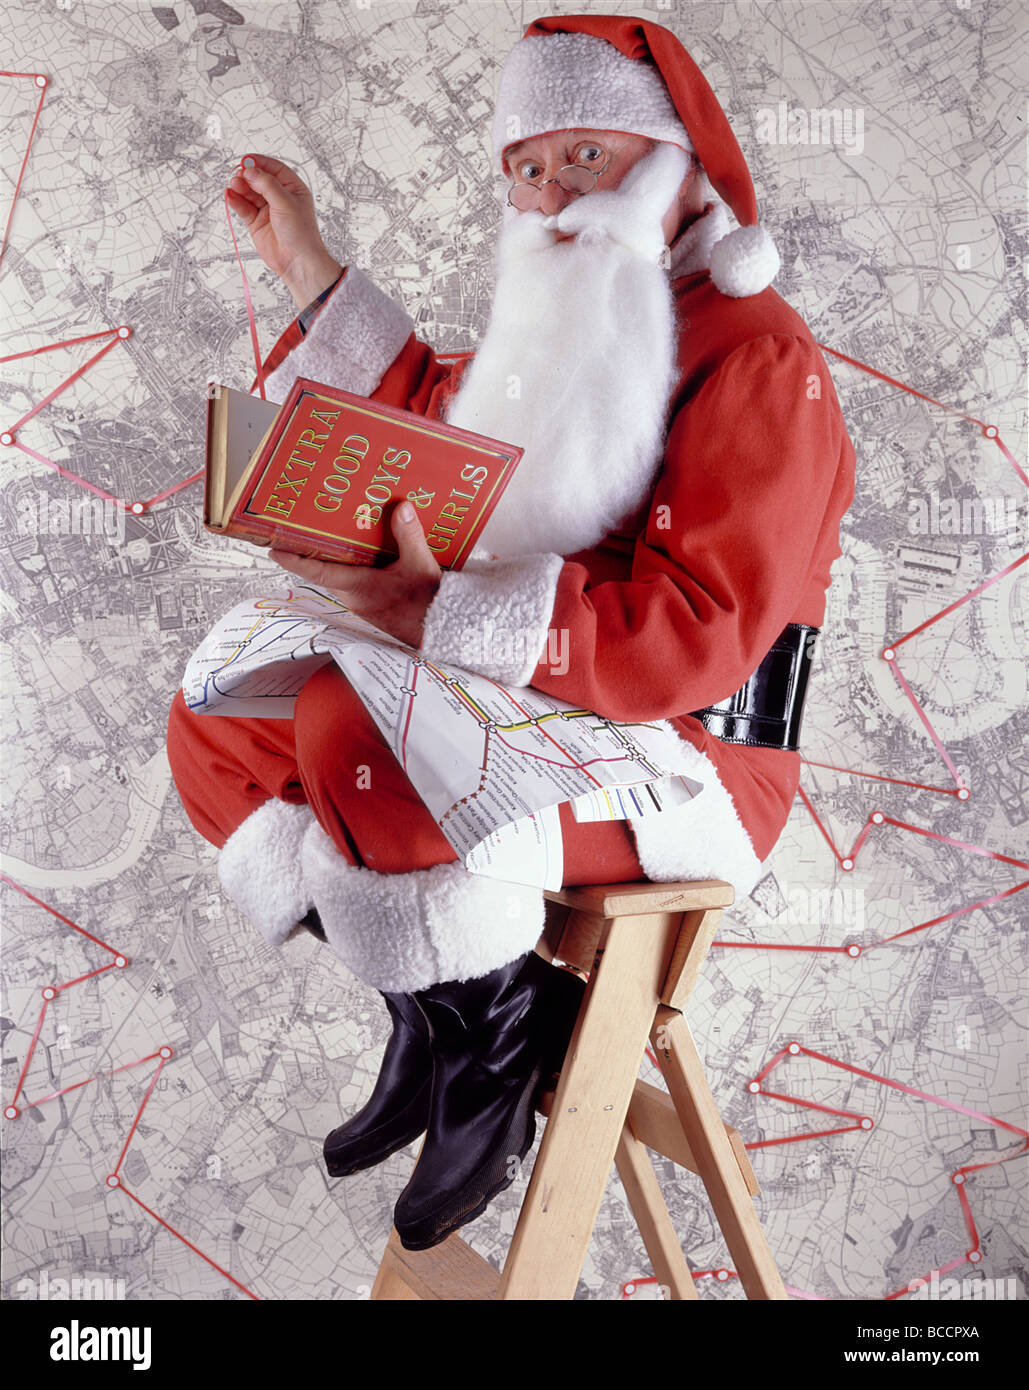 Santa Claus (or Father Christmas) against map and with book entitled ‘EXTRA GOOD BOYS & GIRLS’ Stock Photo